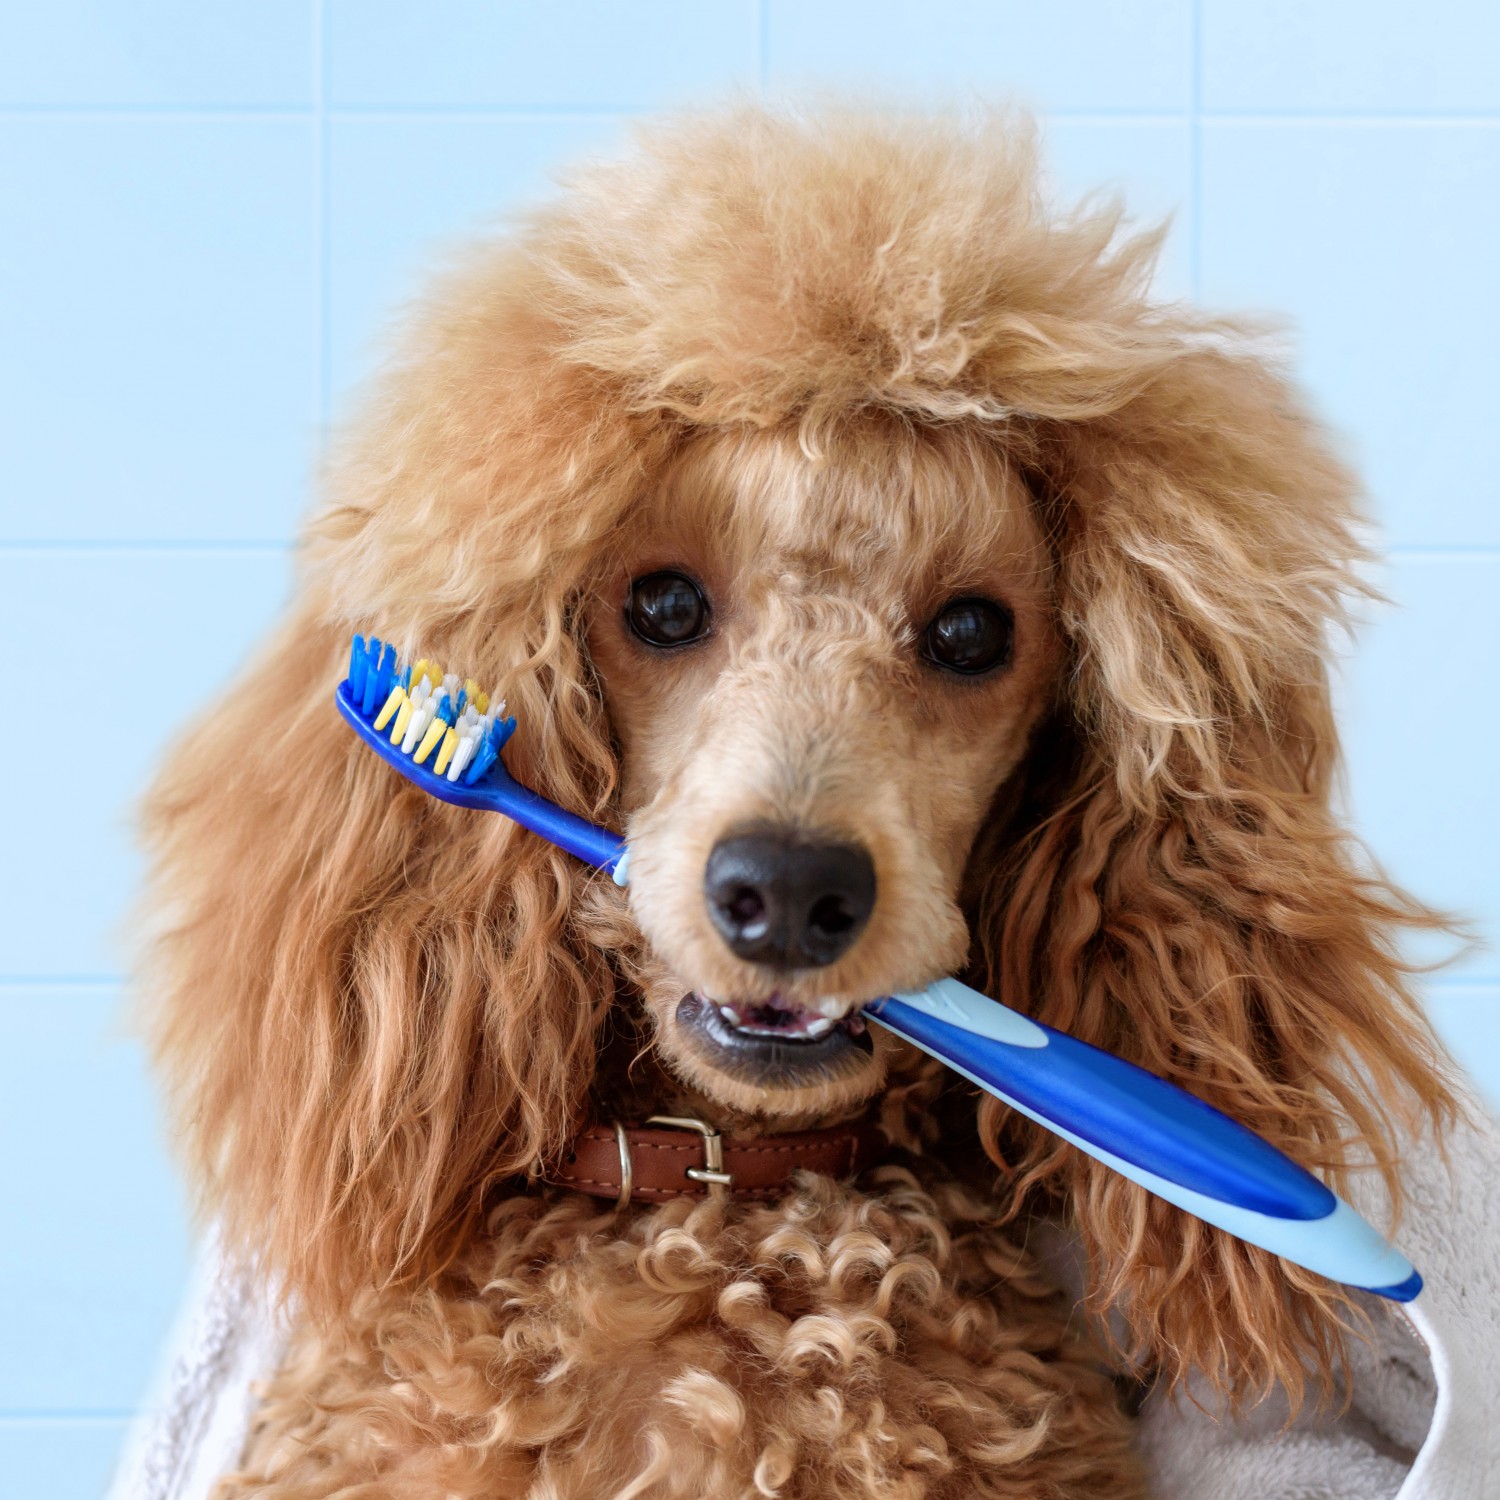 Dental Cleaning - Dog with Toothbrush